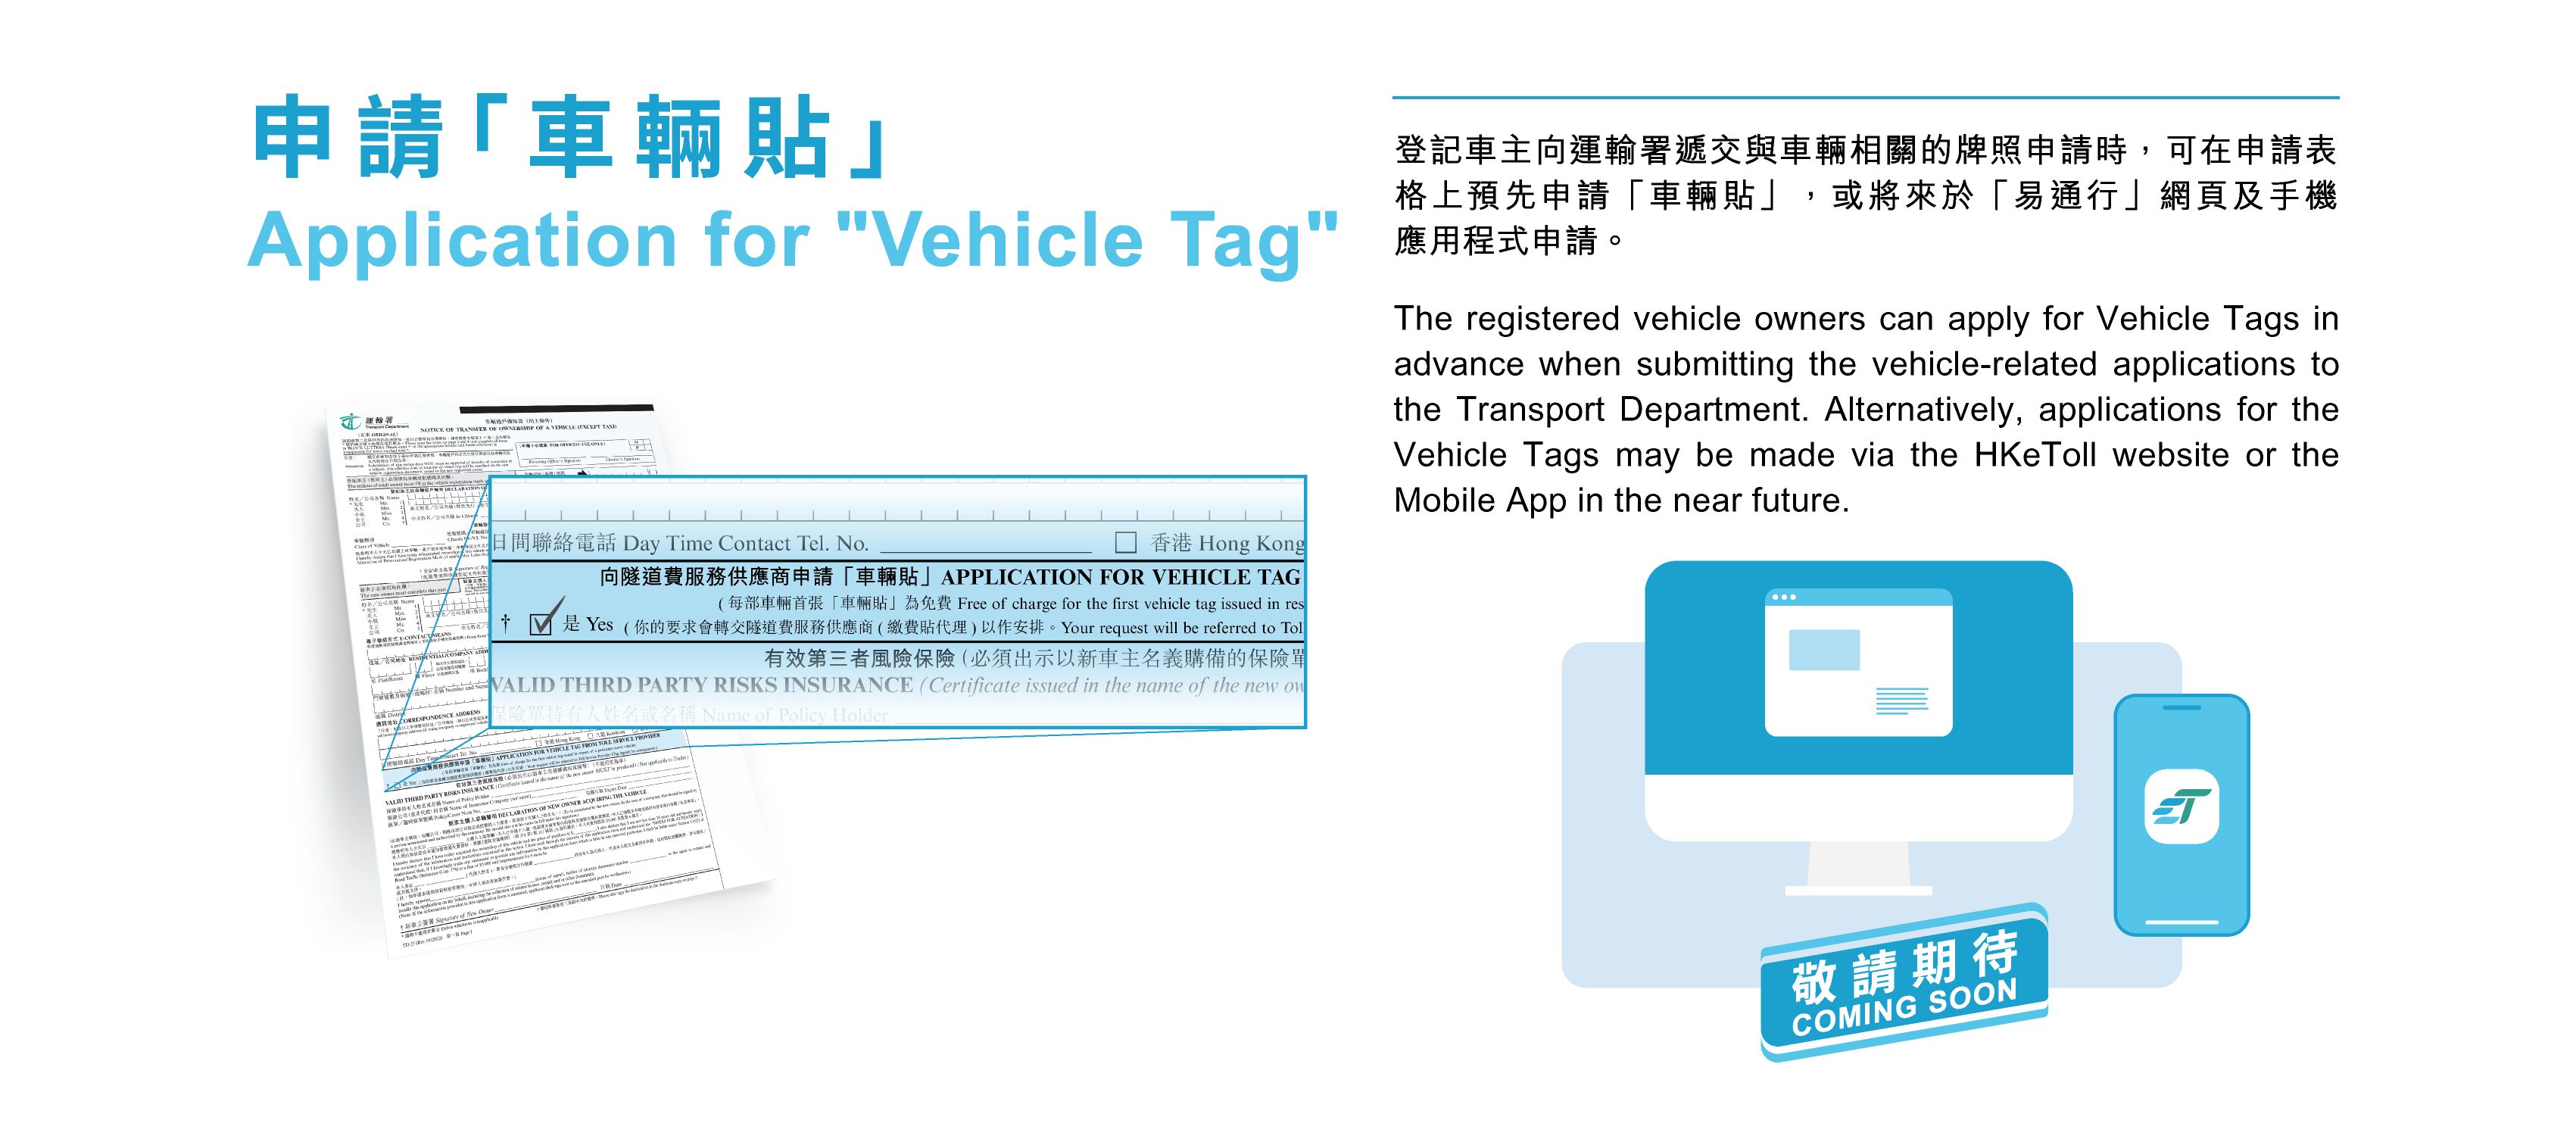 The registered vehicle owners can apply for Vehicle Tags in advance when submitting the vehicle-related applications to the Transport Department. Alternatively, applications for the Vehicle Tags may be made via the HKeToll website or the Mobile App in the near future.